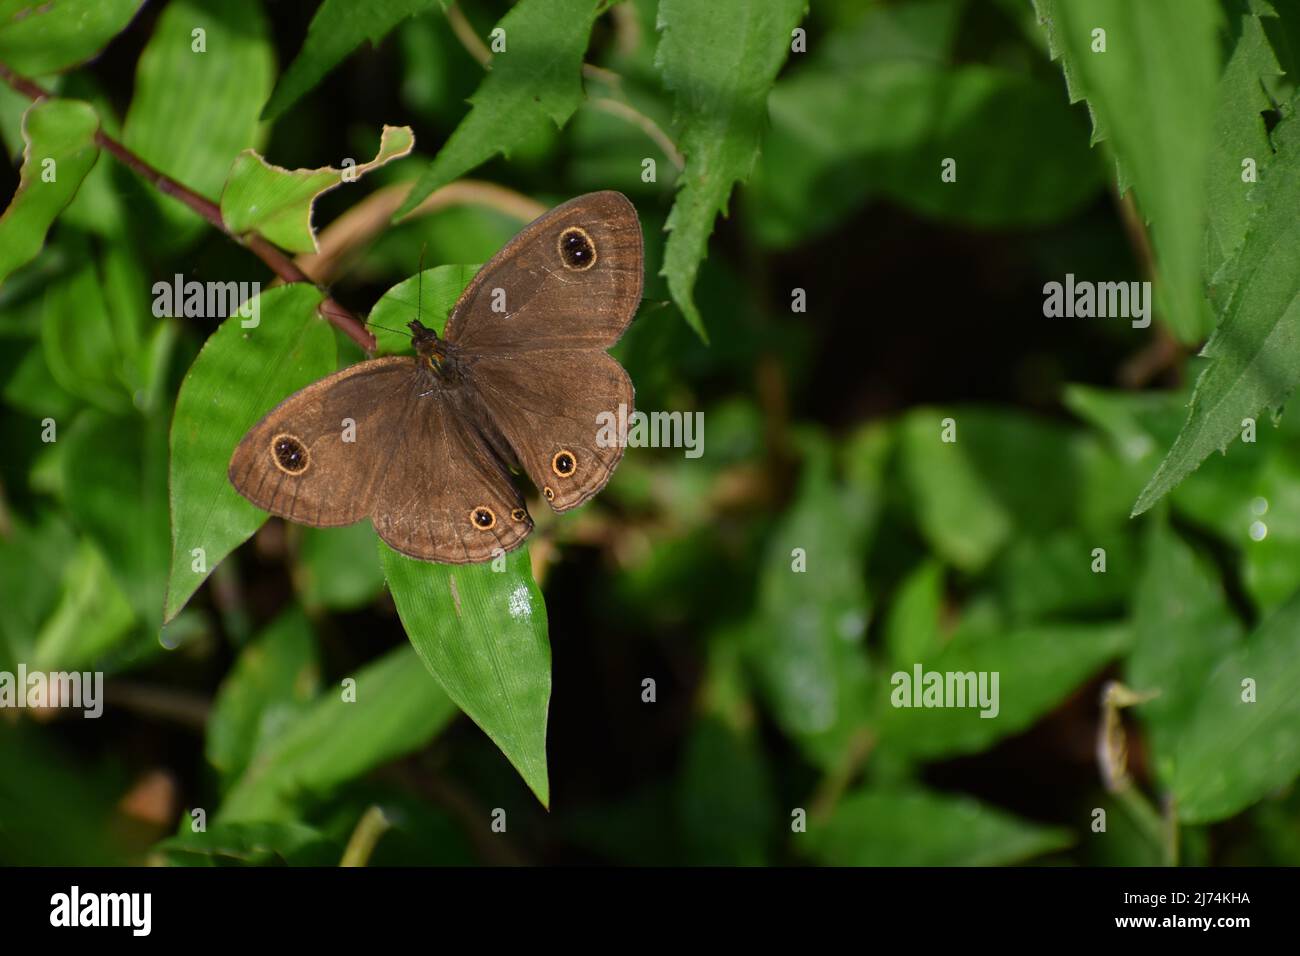 Bushbrowns butterfly perched on green leaves. Stock Photo